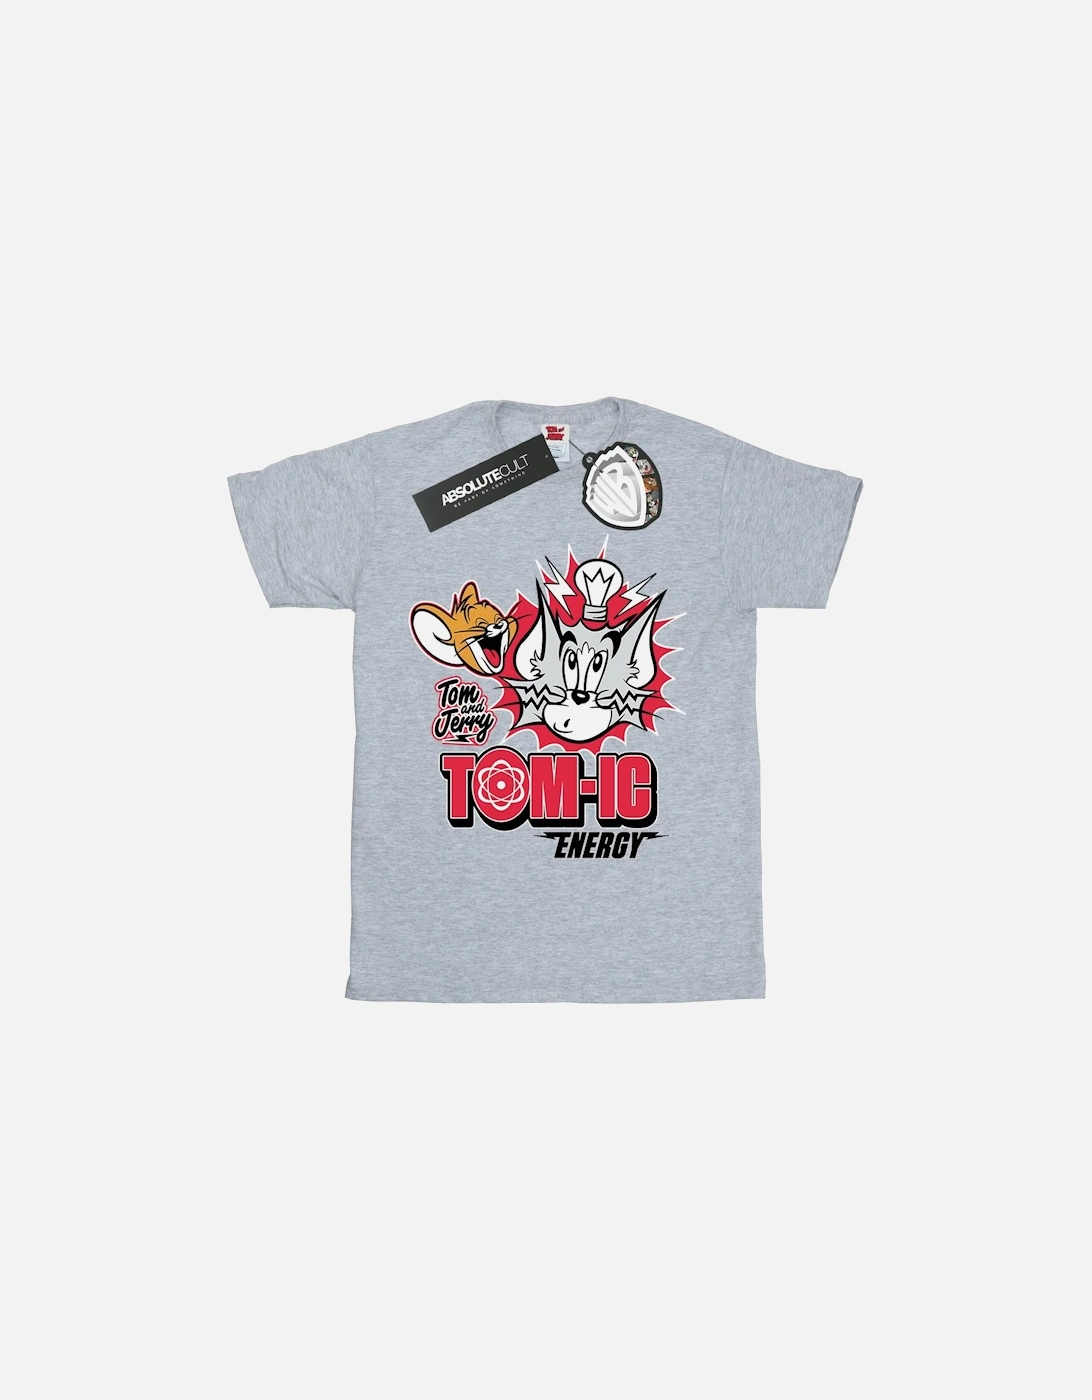 Tom And Jerry Girls Tomic Energy Cotton T-Shirt, 6 of 5